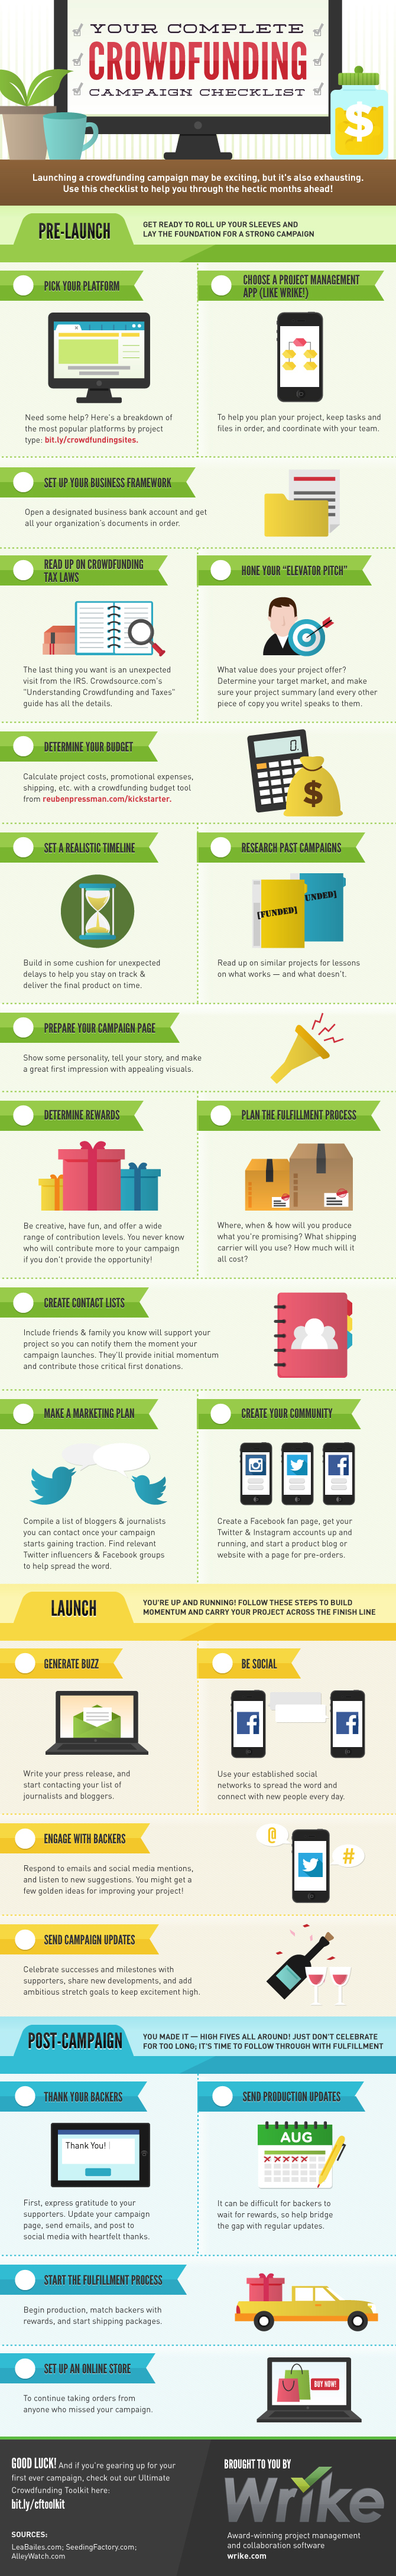 The Ultimate Crowdfunding Campaign Checklist (infographic)